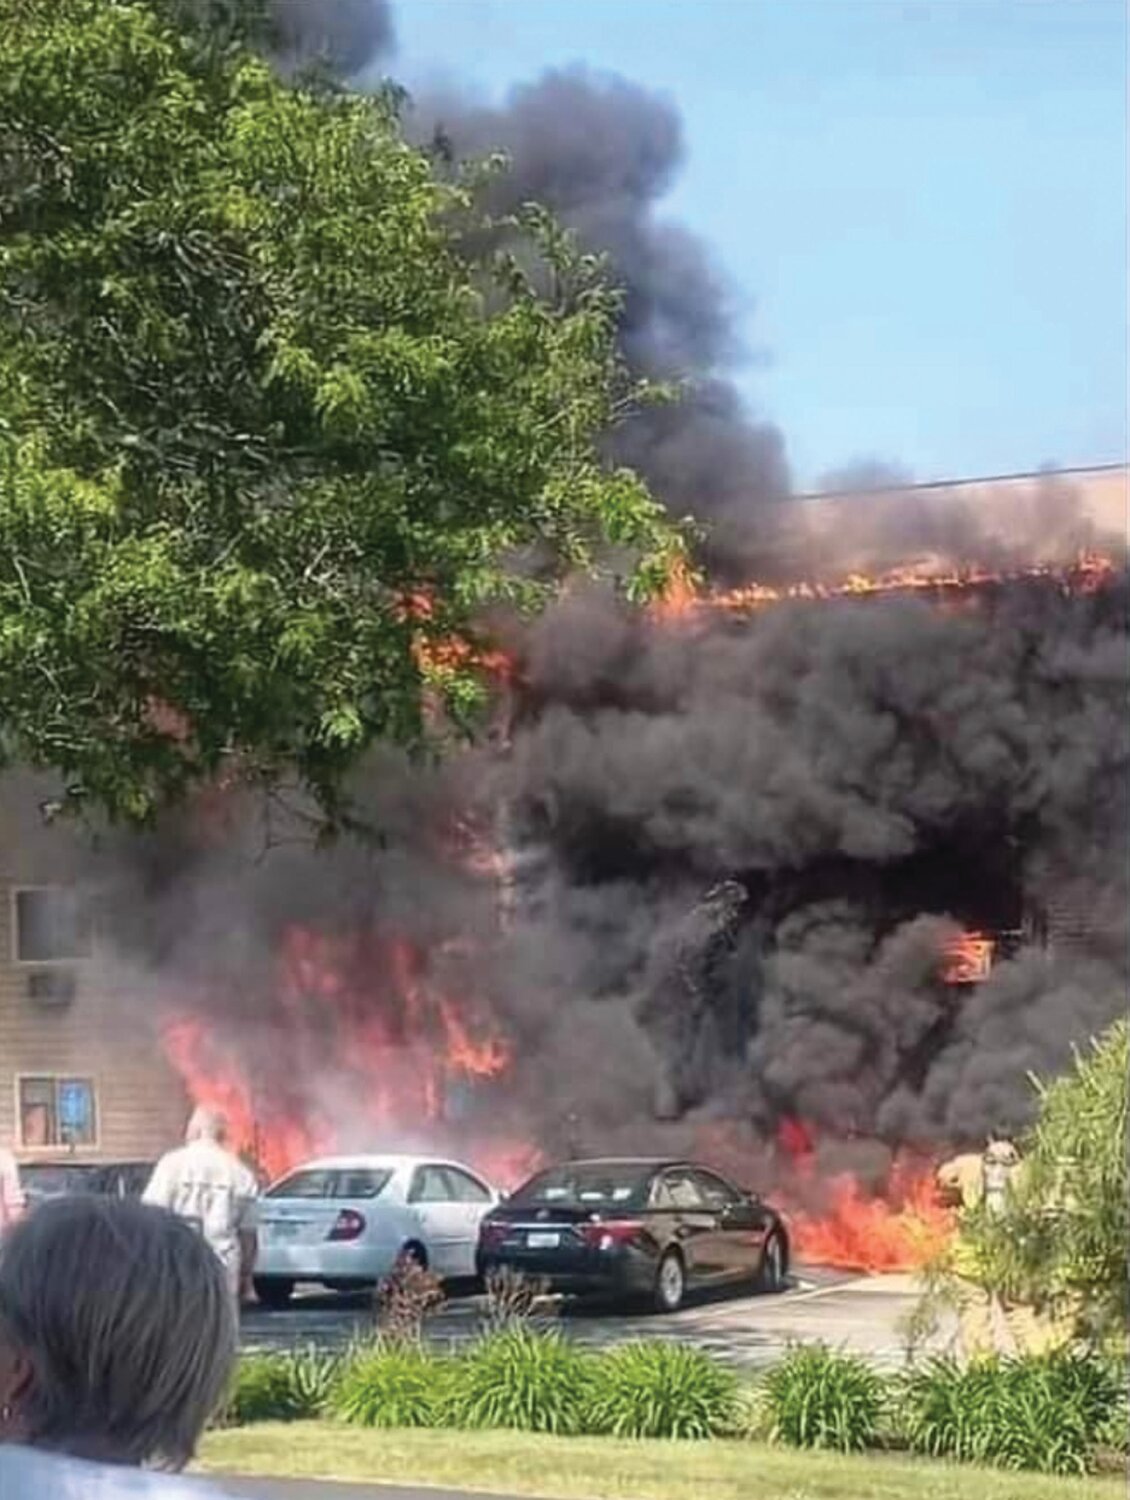 BURNED OUT: A 45-unit building, at 343 Simmonsville Ave. was evacuated on Sunday, May 28, after flames fully engulfed the façade, creeping up to the building from burning mulch. Residents in need of assistance have been awaiting confirmation they would continue receiving assistance following June 30. They received good news on Tuesday.